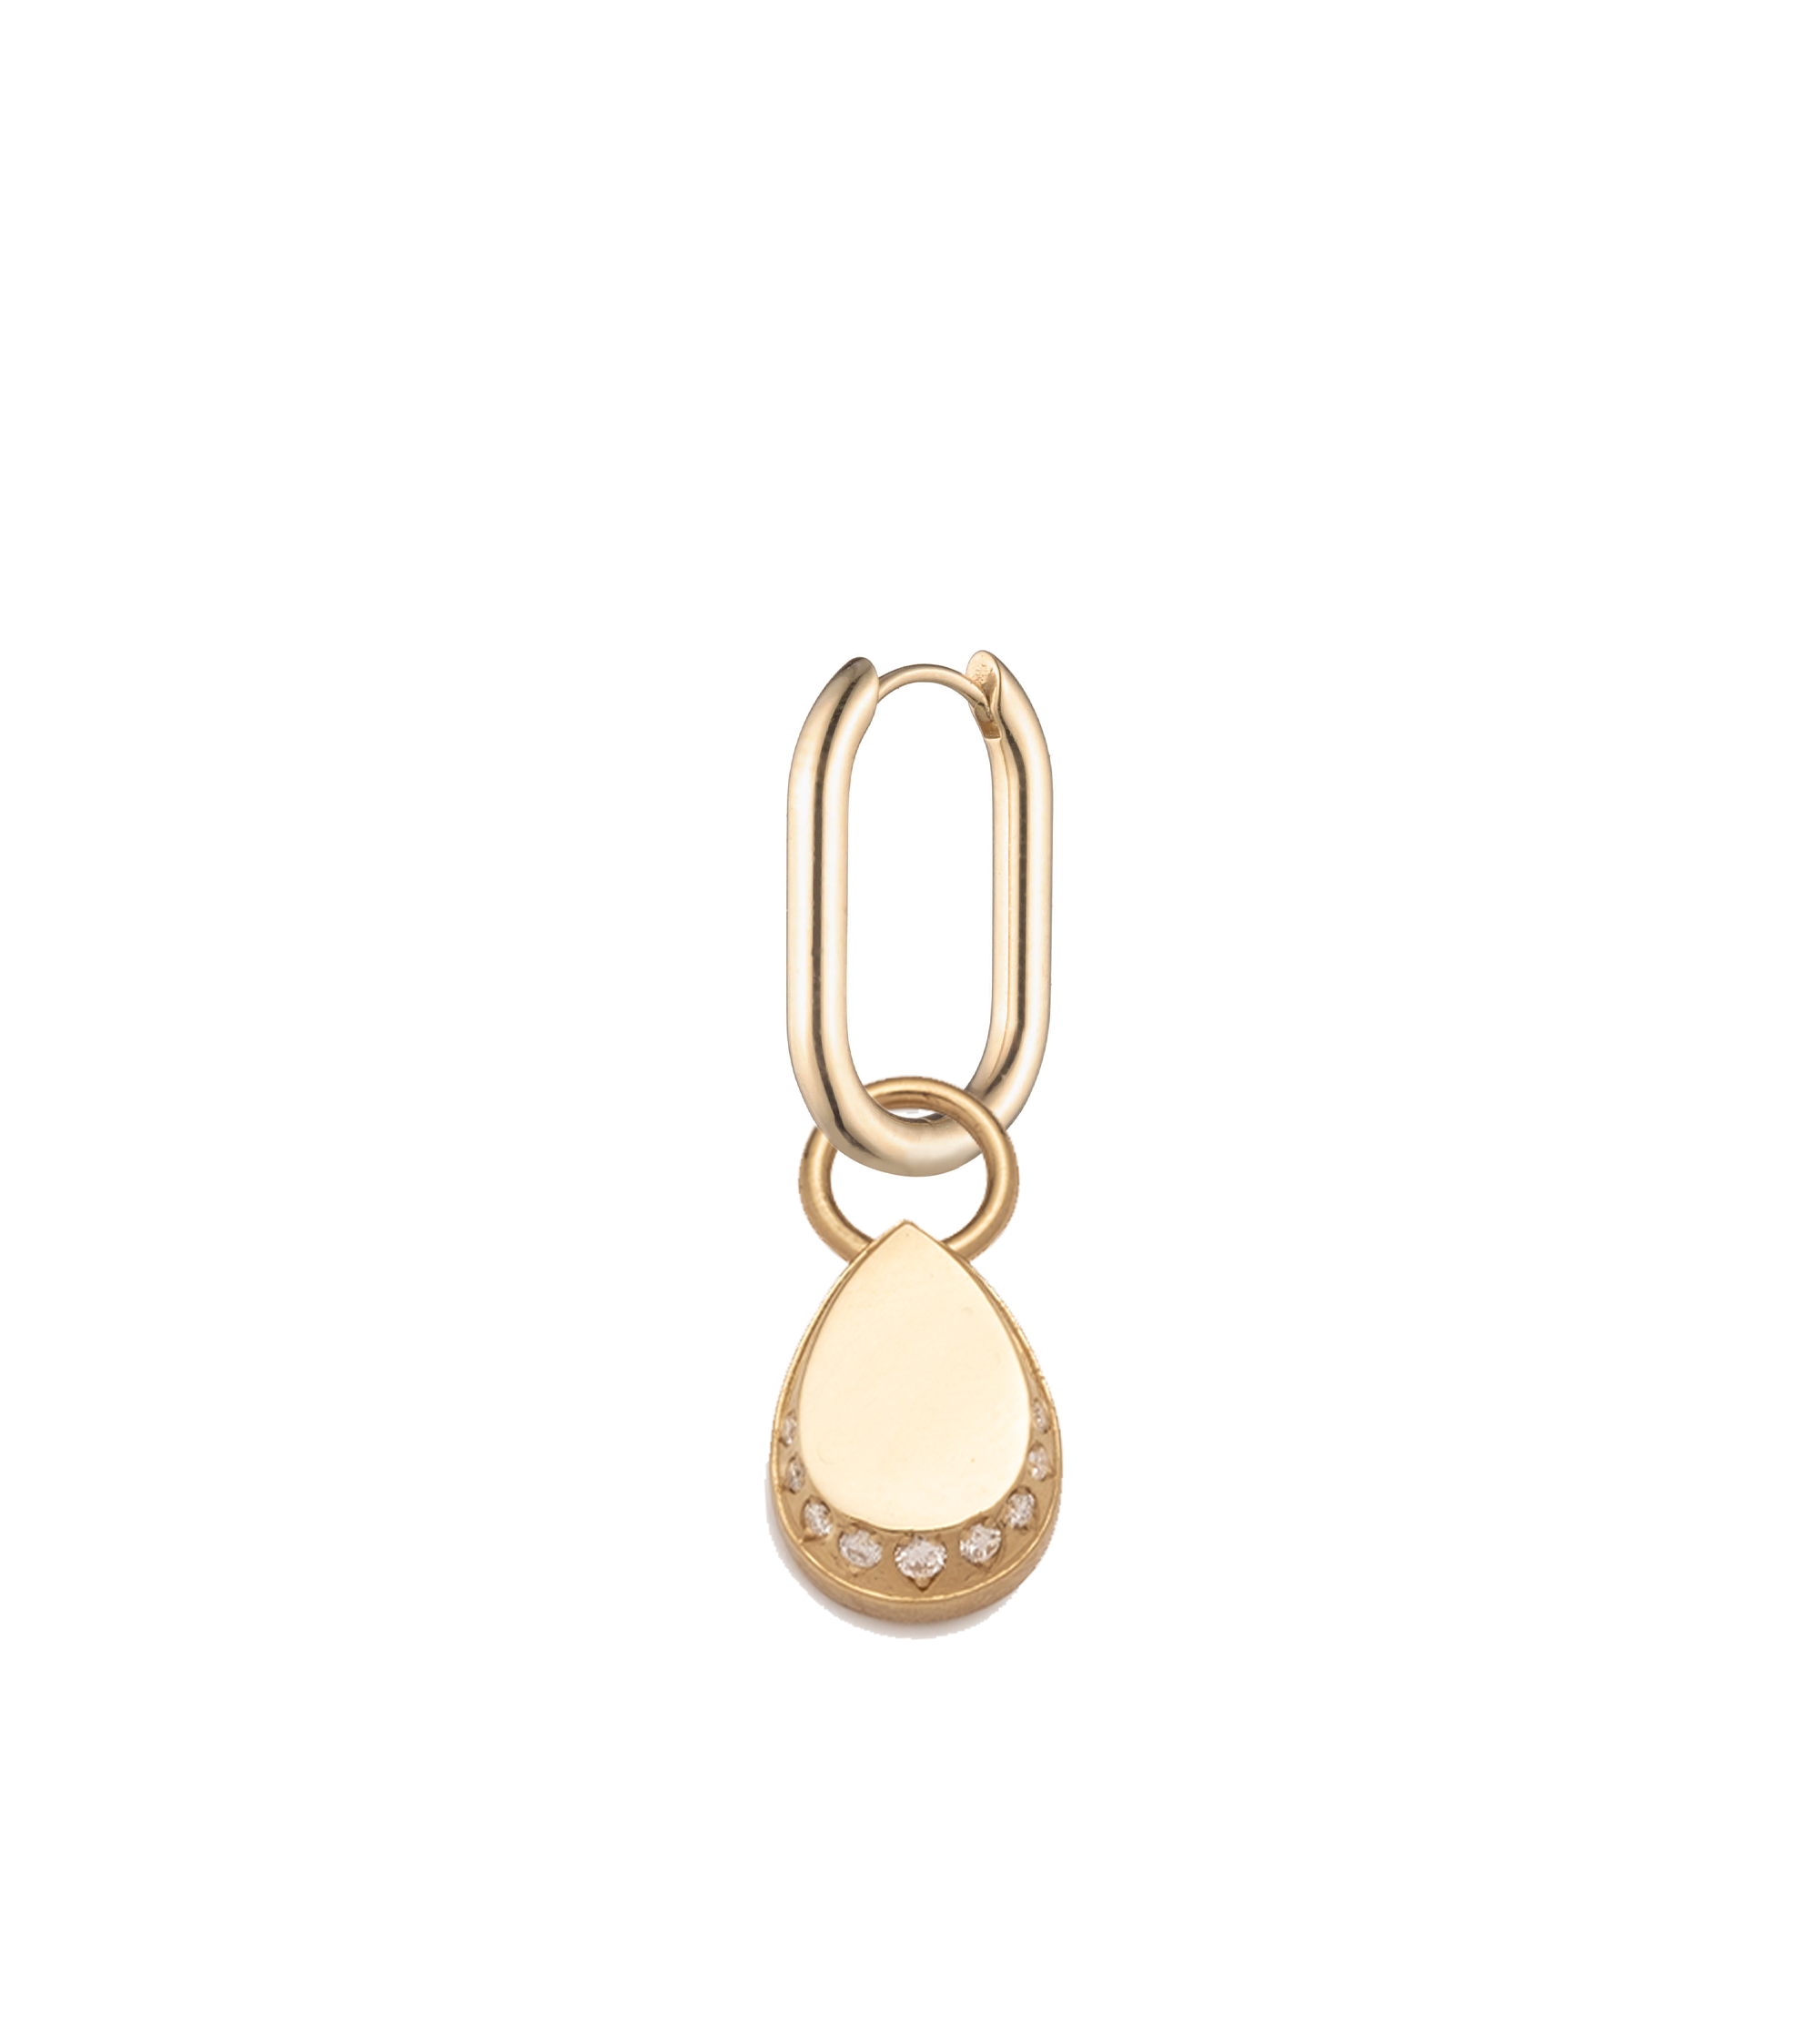 Small Engravable Pear - Love : Small Chubby Fob Earring Story